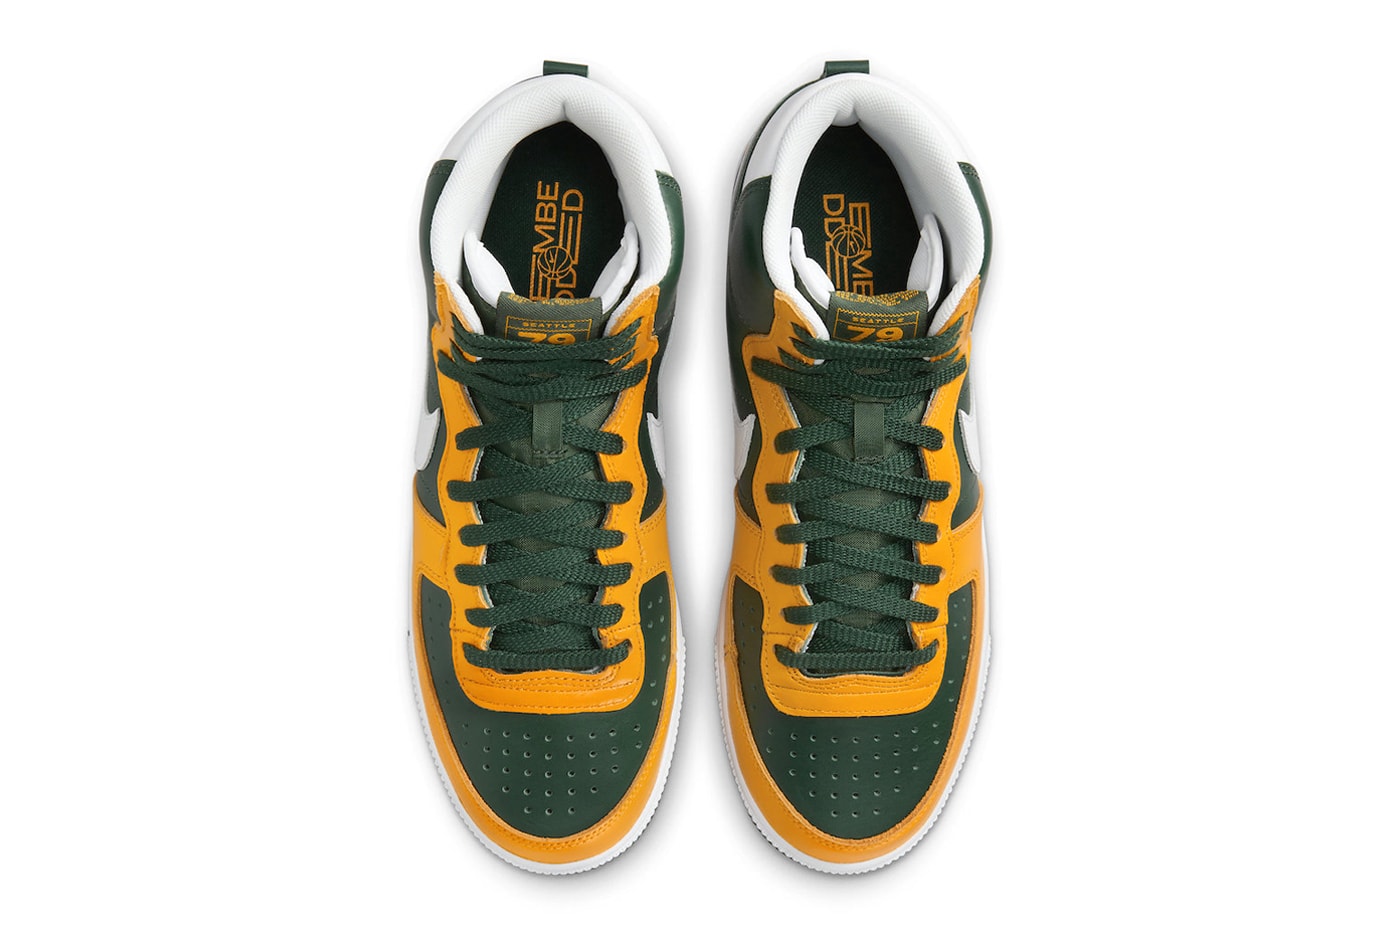 Nike Terminator High "Seattle Supersonics" Return Black Forest/White-Del Sol FN4442-300 green yellow high tops swoosh retro shoes